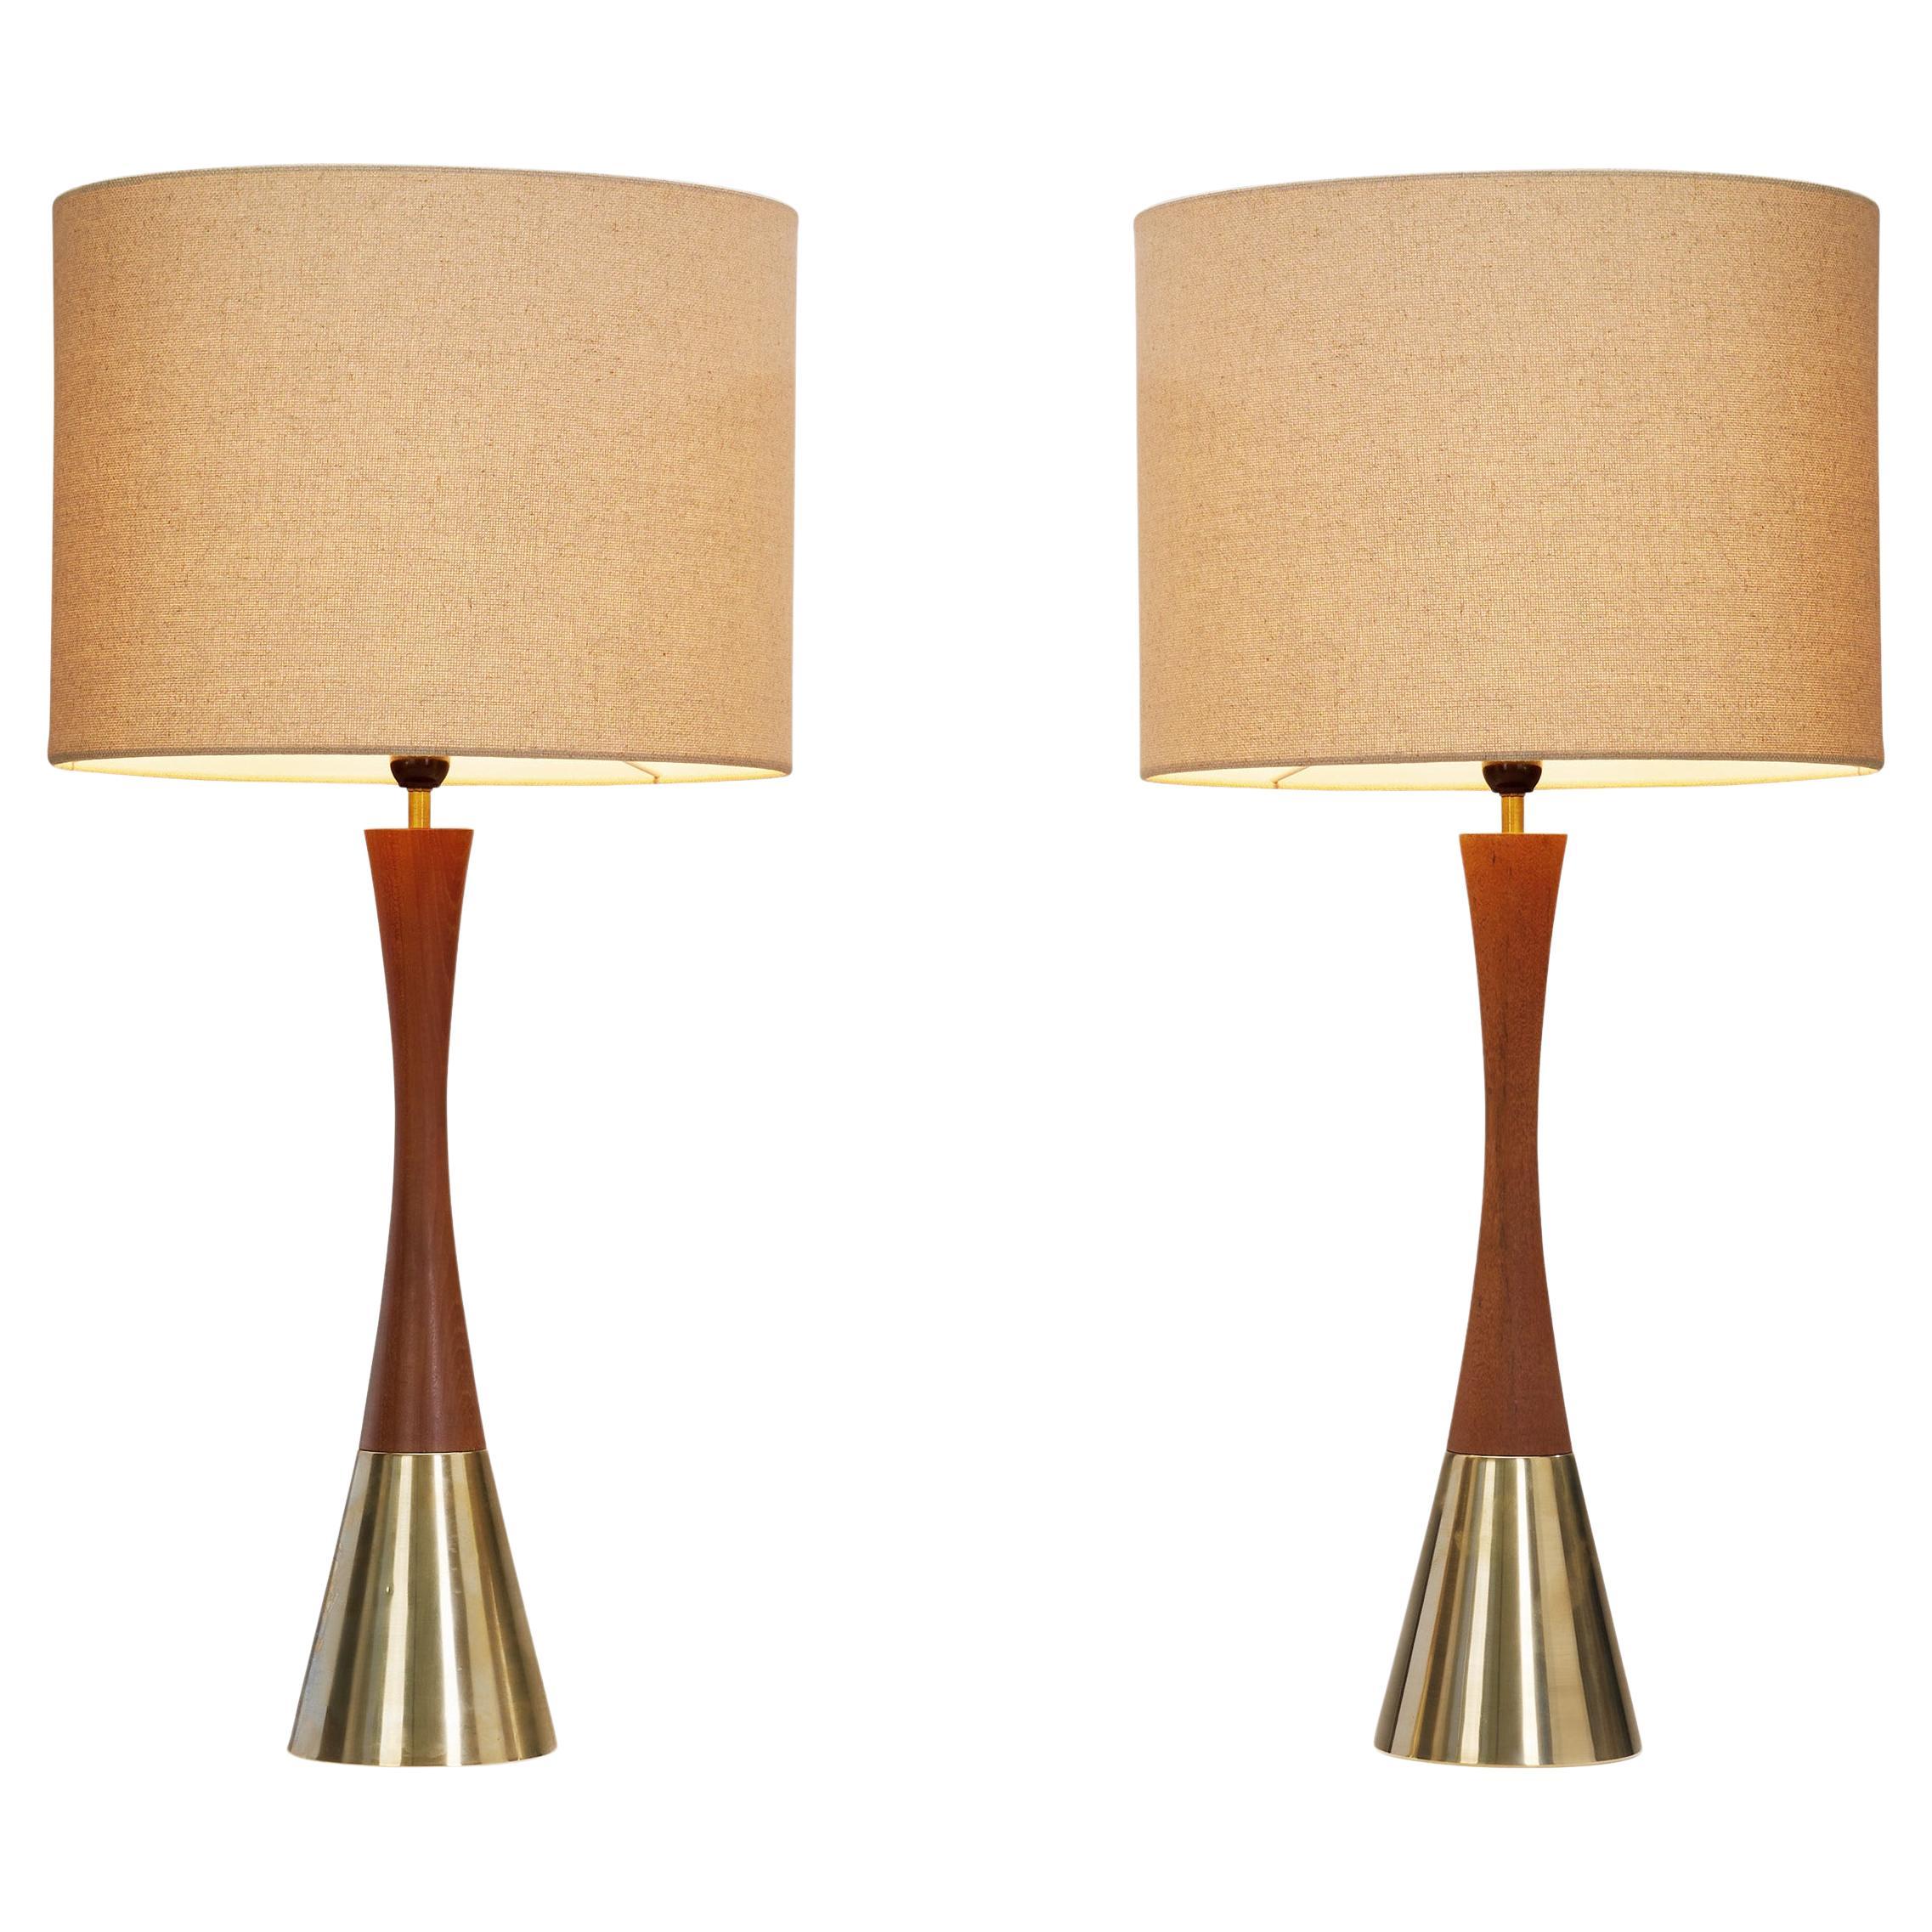 Pair of Teak and Brass Table Lamps by Bergboms, Sweden ca 1970s